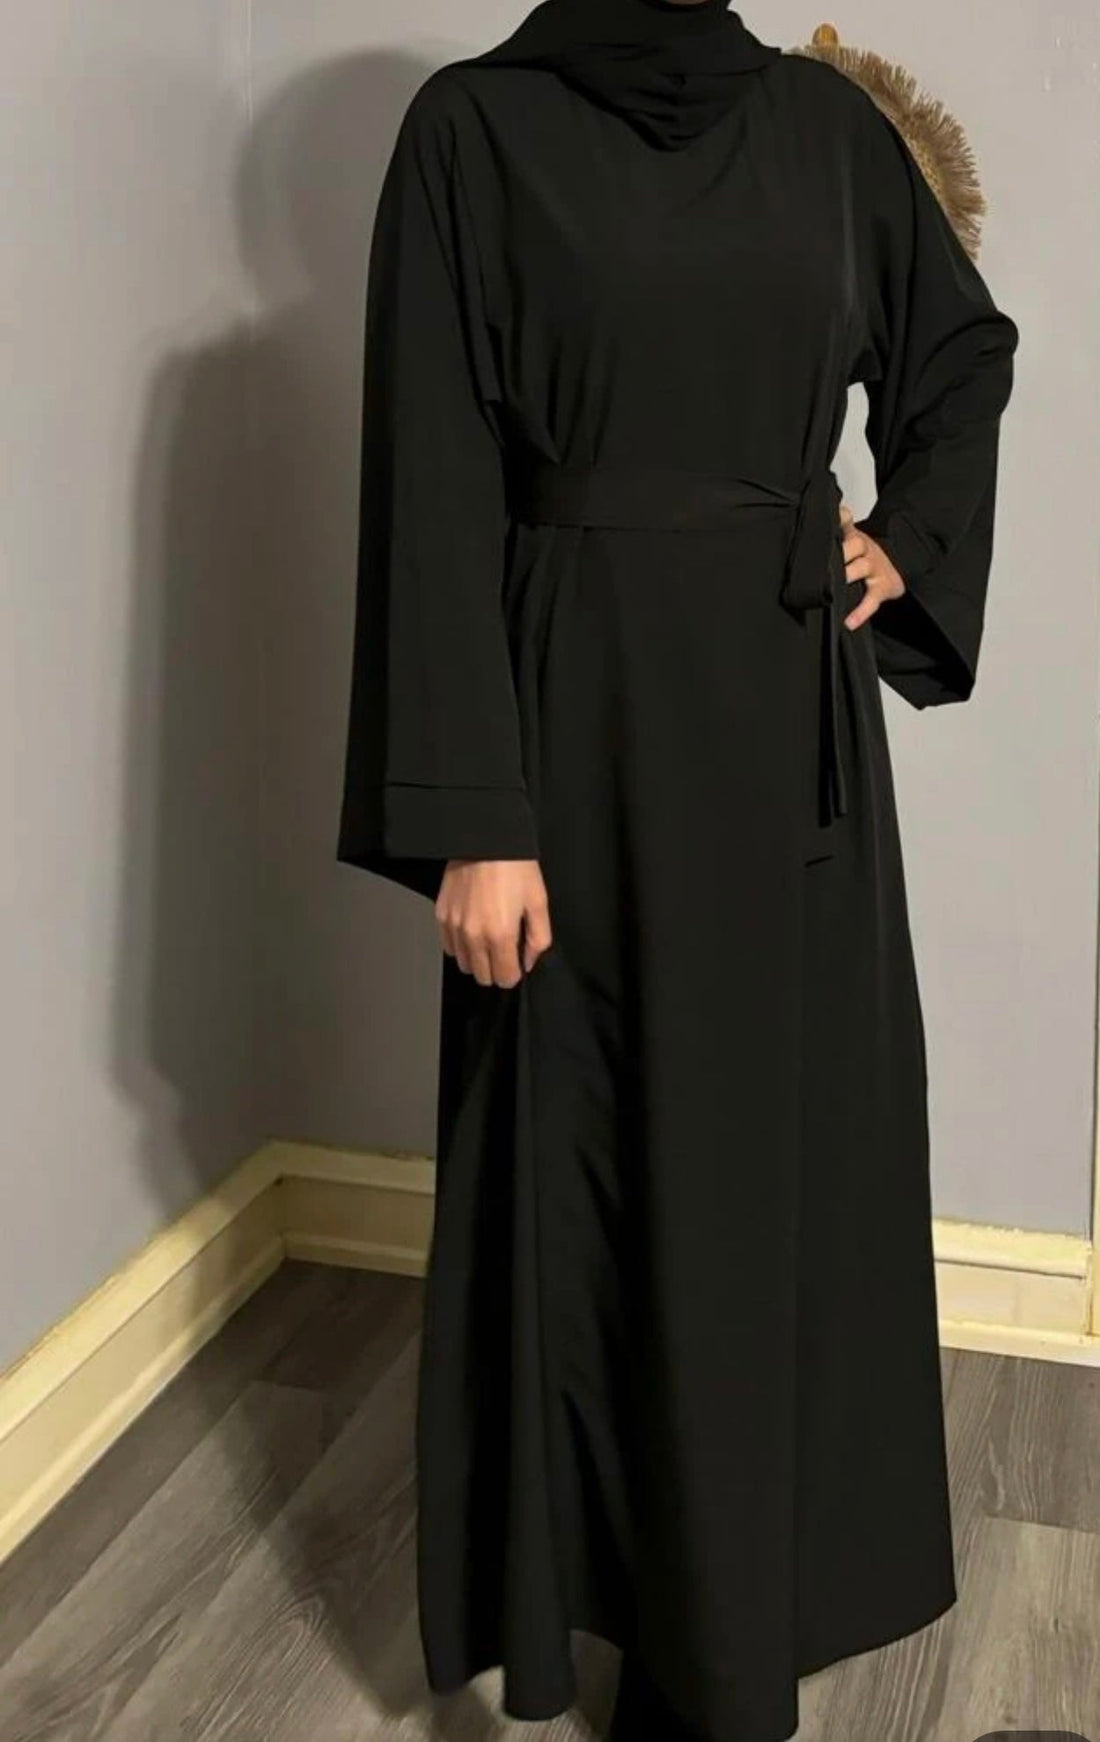 Shopping Abayas Online: Why It's the Future of Modest Fashion